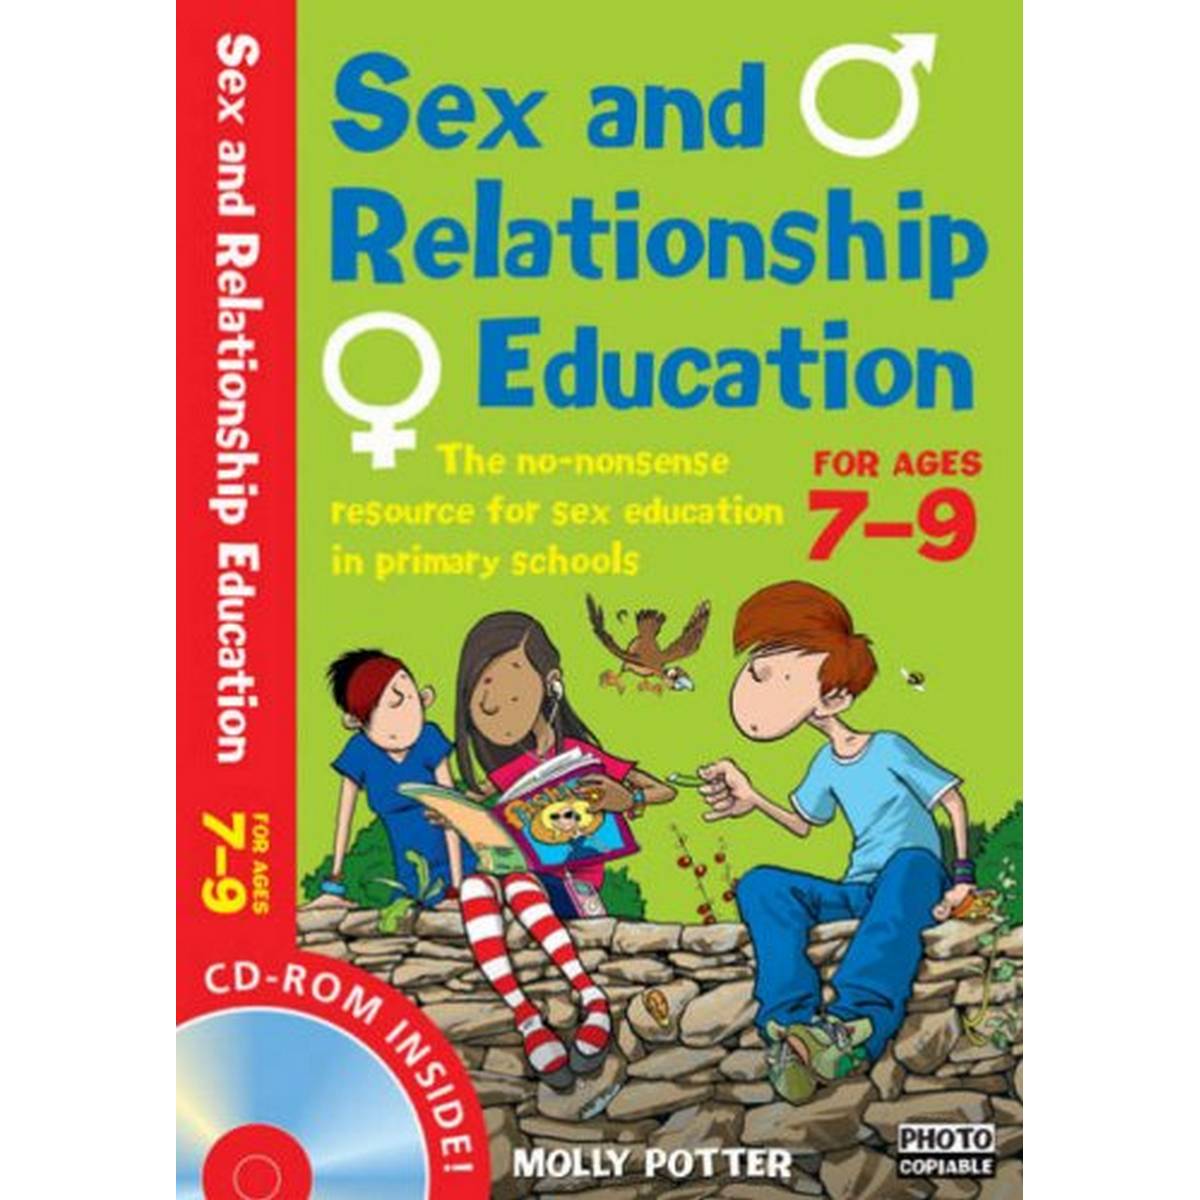 Sex & Relationship Education Ages 7-9